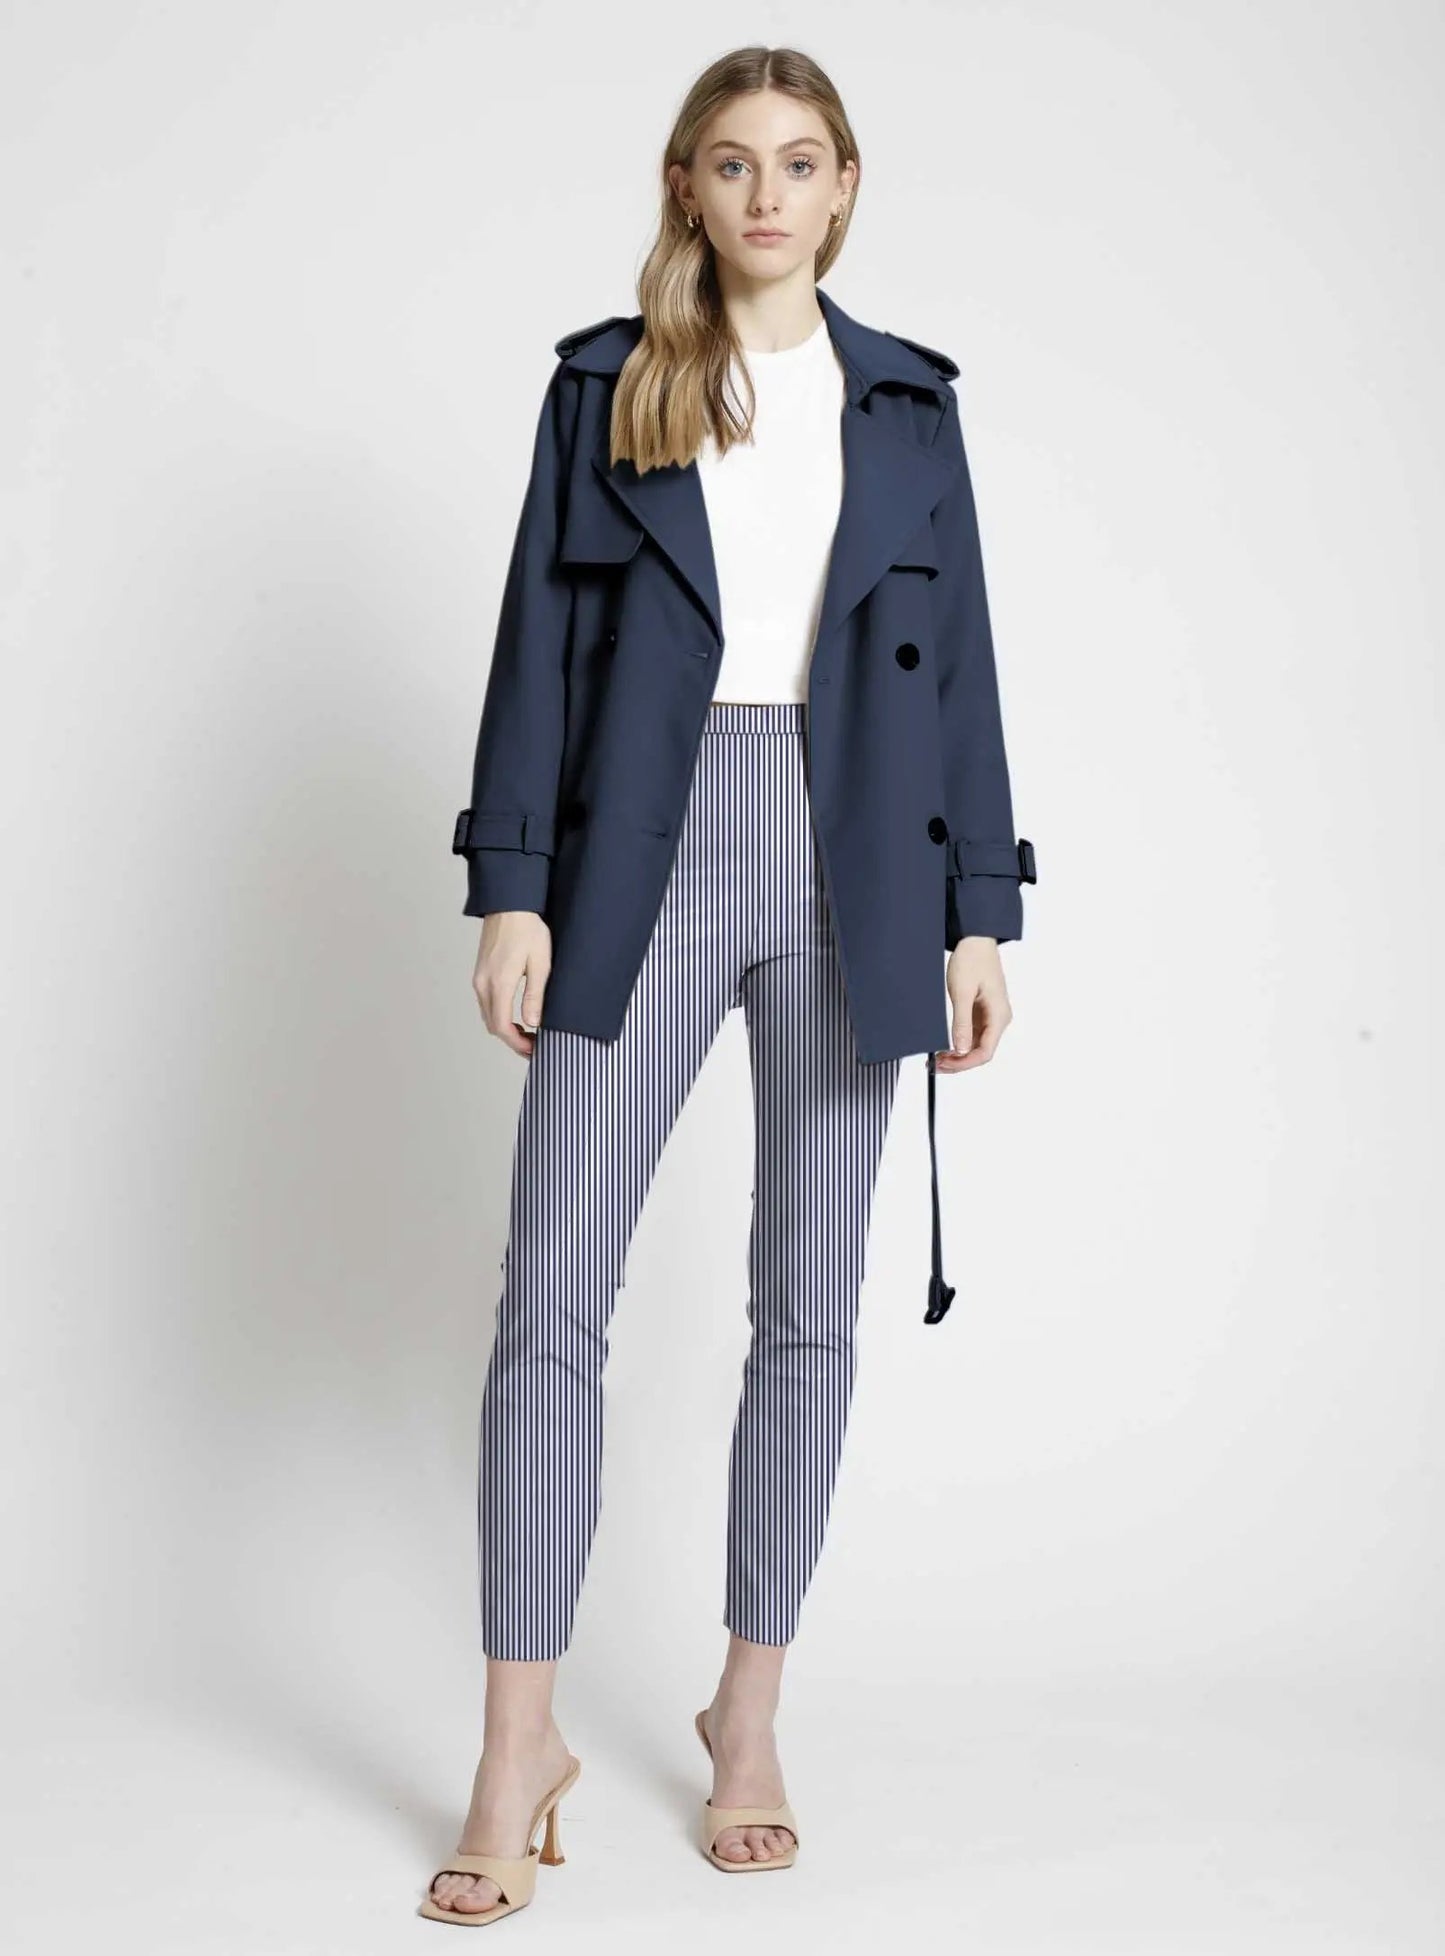 Woman modeling a navy trench coat with comfort-style Point Zero Pull-on Stripe Crop Pants and open-toe heels against a neutral background.